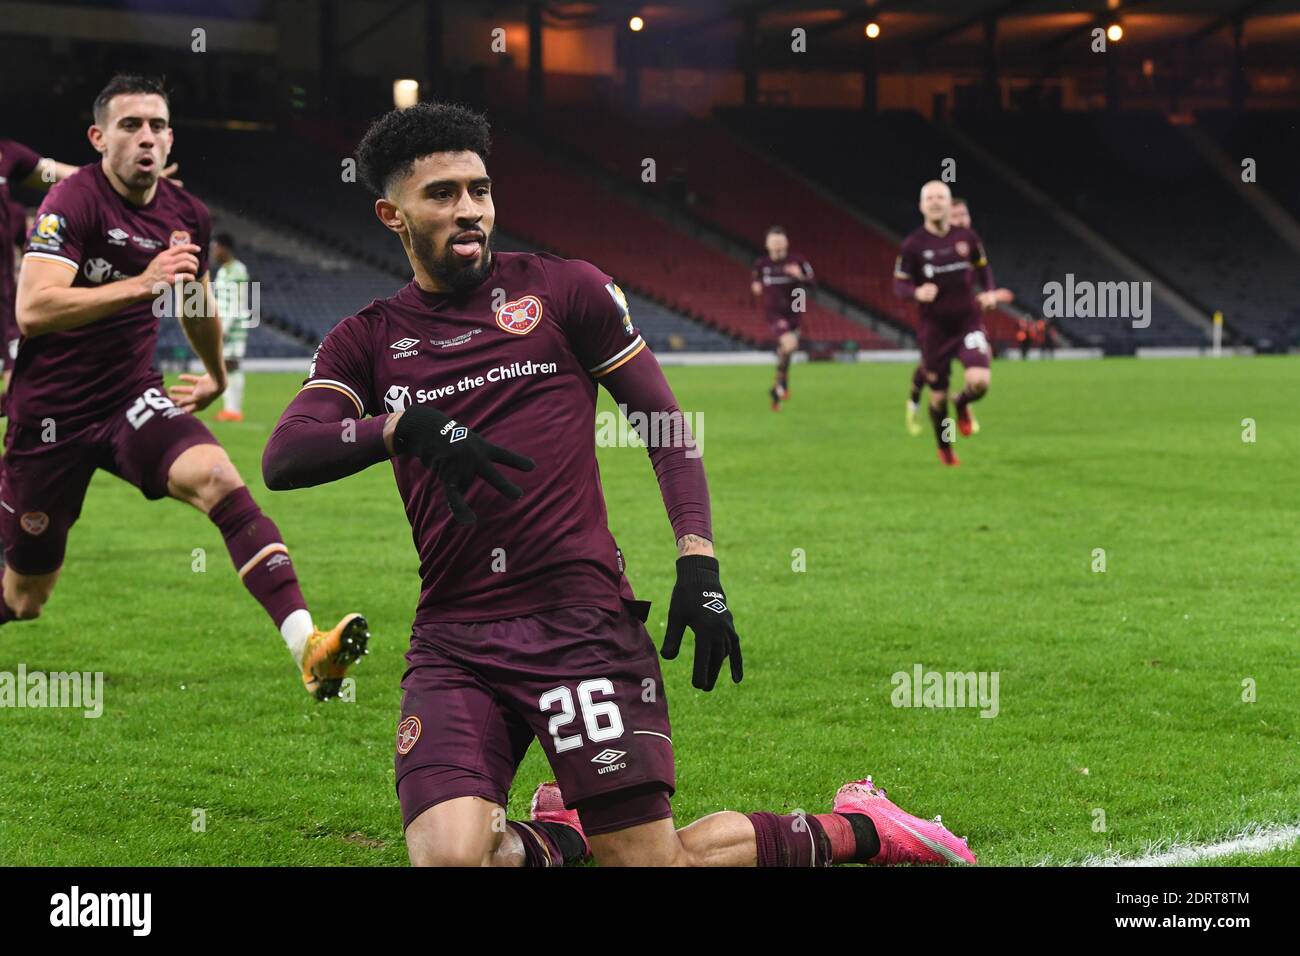 Hampden Park, Glasgow, Scotland, UK.  20th December, 2020. William Hill Scottish Cup Final 2019-20.  Pic shows Hearts Josh Ginnelly (L) celebrating his equalising goal in the 3-3 draw AET 4-3 with Olly Lee Credit: eric mccowat/Alamy Live News Stock Photo